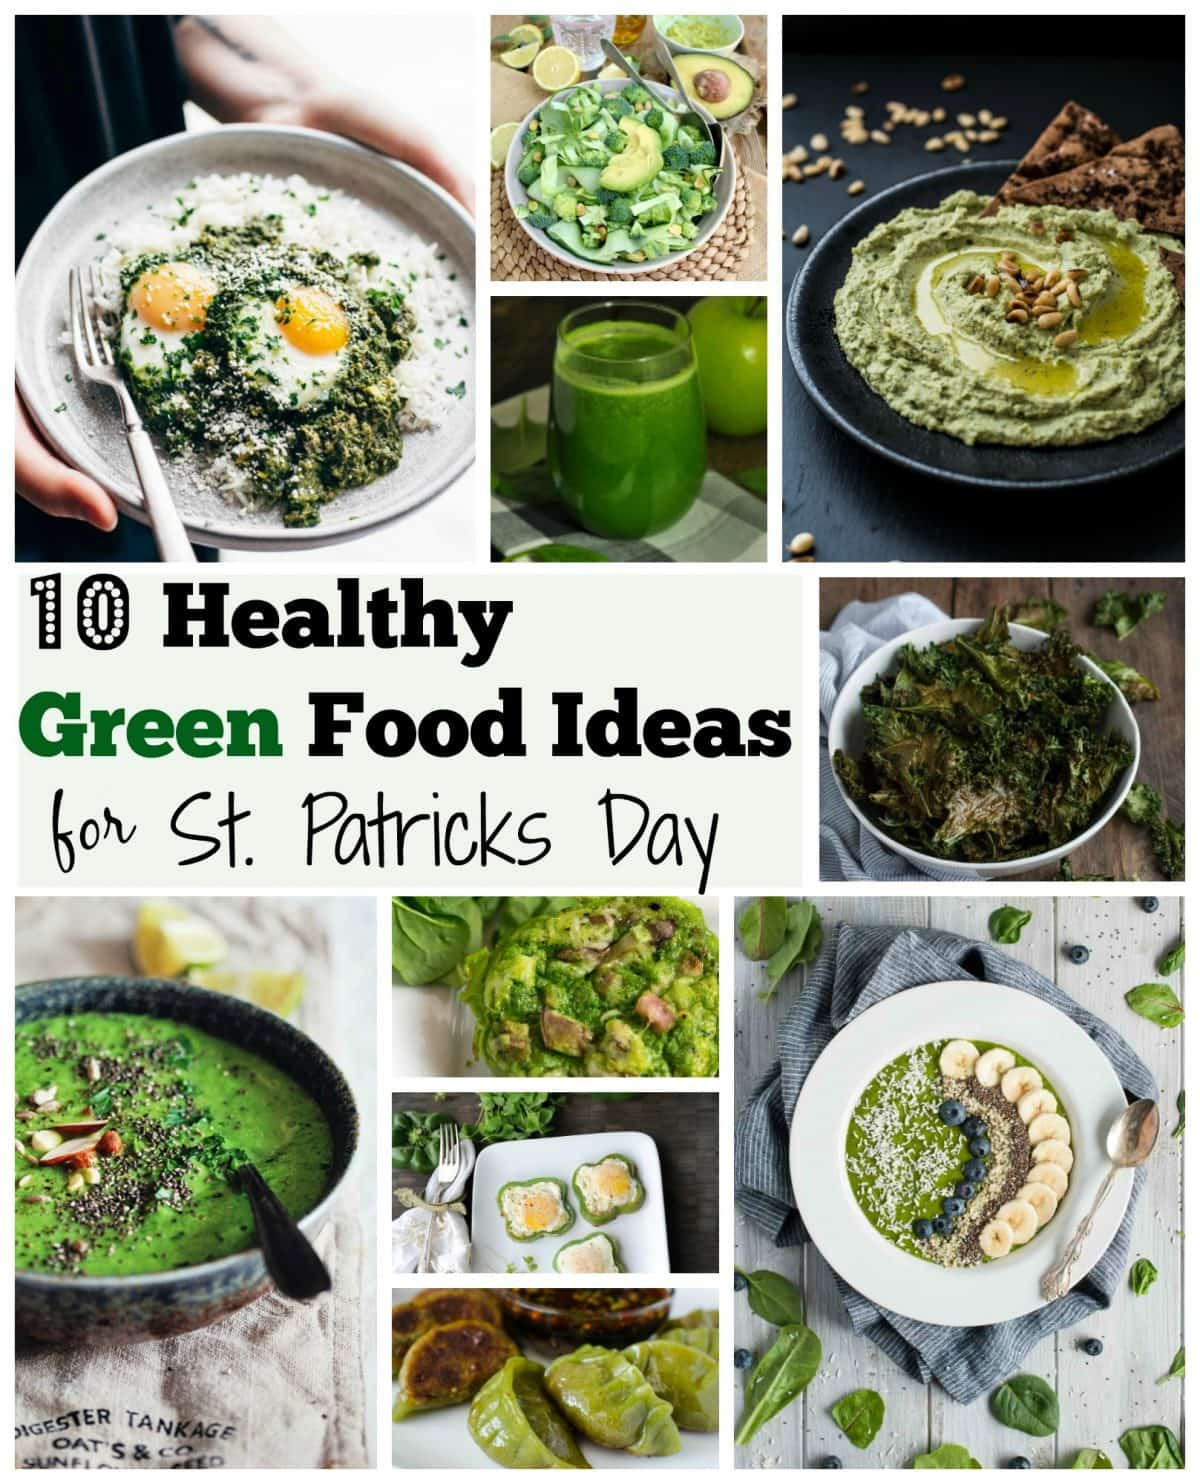 St Patrick's Day Snack Ideas
 10 Healthy Green Food Ideas for St Patricks Day